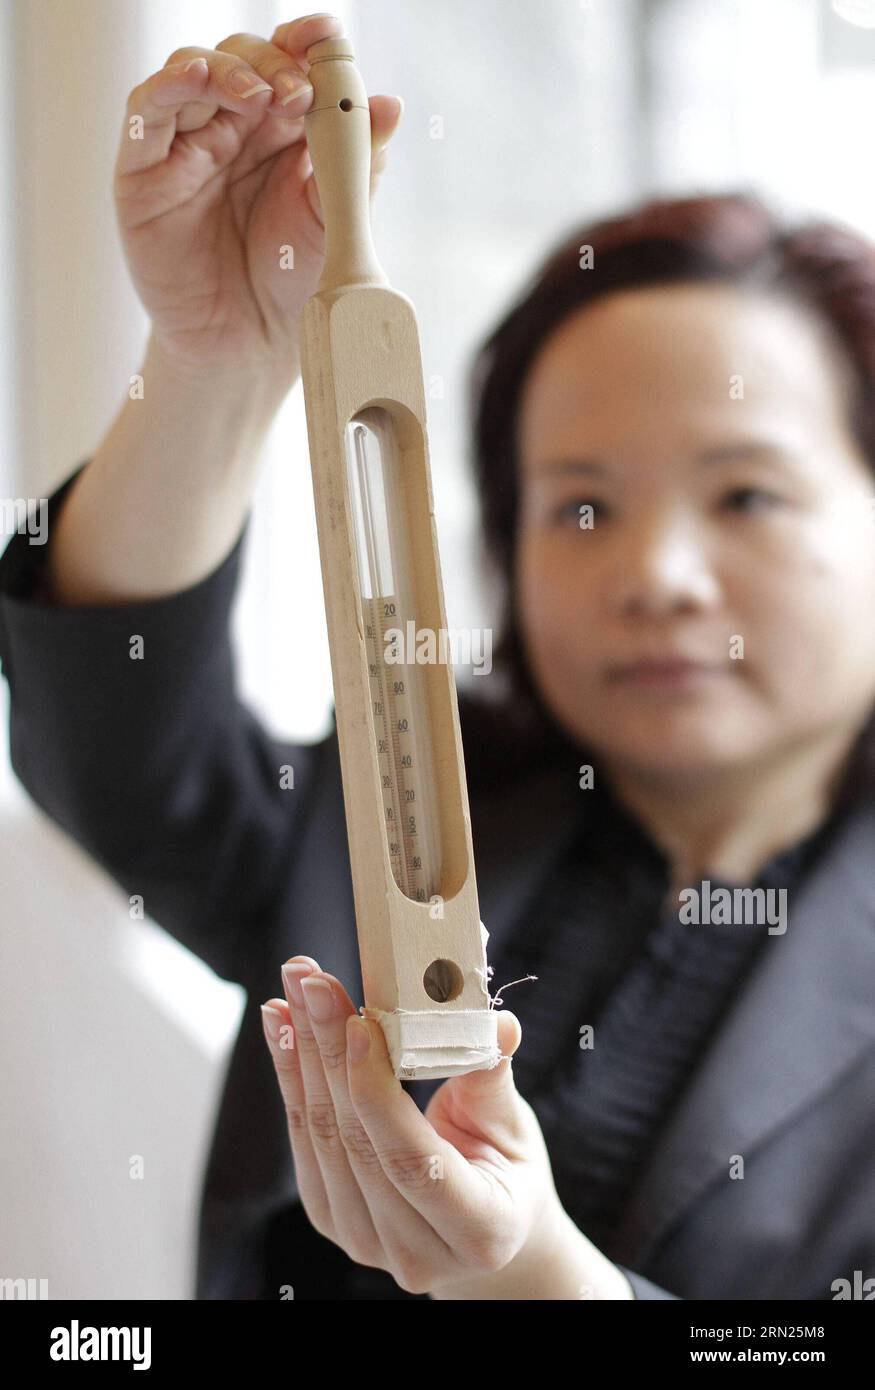 A nursing school alumni displays a thermometer used in early 19th century during the nursing school celebration event at University of British Columbia in Richmond, Canada, Feb. 10, 2015. In honour of the Canadian nursing pioneer Ethel Johns (1879-1968) named as National Historic Person of Canada, the School of Nursing in University of British Columbia held an event displaying the former nursing uniforms and historic nursing tools during the World War I to commemorate her contribution. Ethel Johns established the first university degree nursing program in Canada at the University of British Co Stock Photo